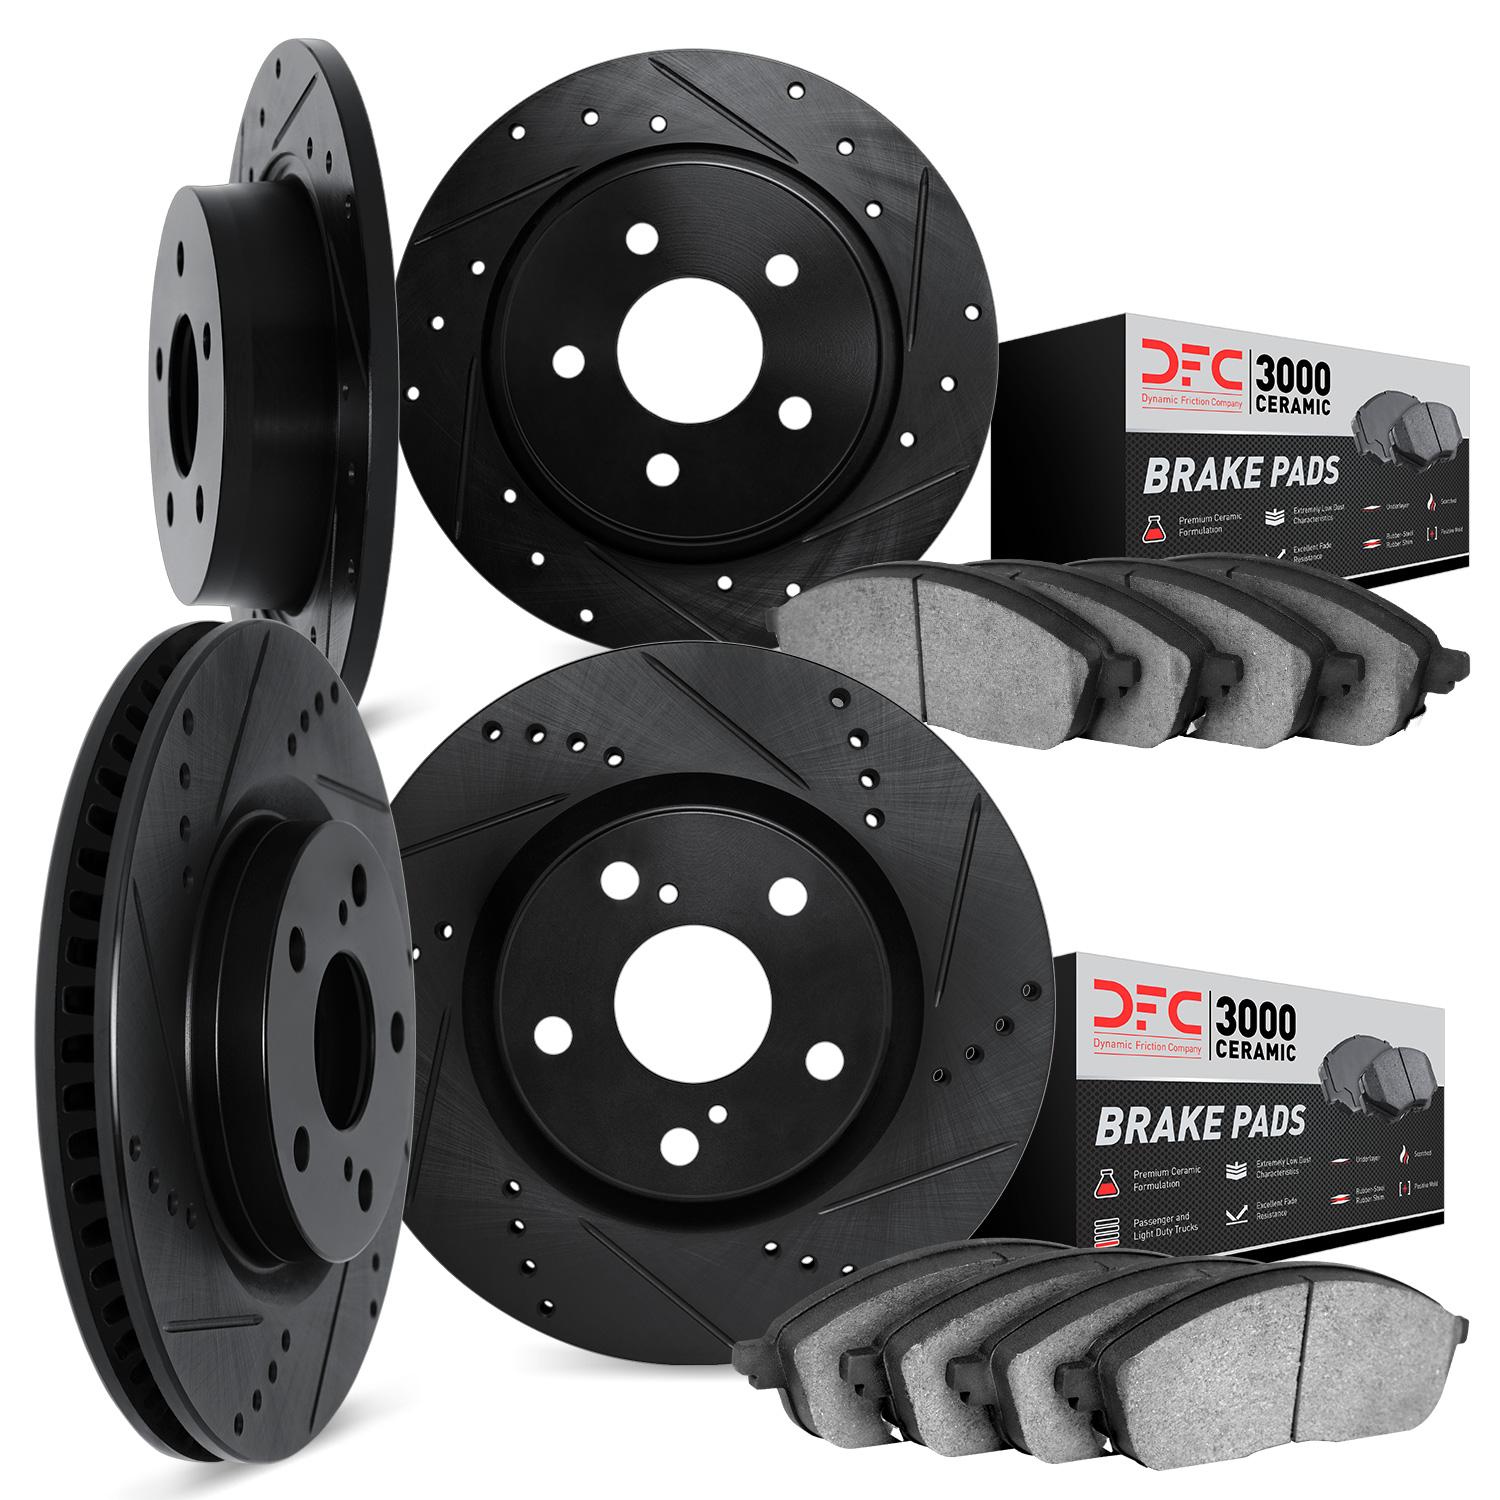 8304-27030 Drilled/Slotted Brake Rotors with 3000-Series Ceramic Brake Pads Kit [Black], 1991-1995 Volvo, Position: Front and Re